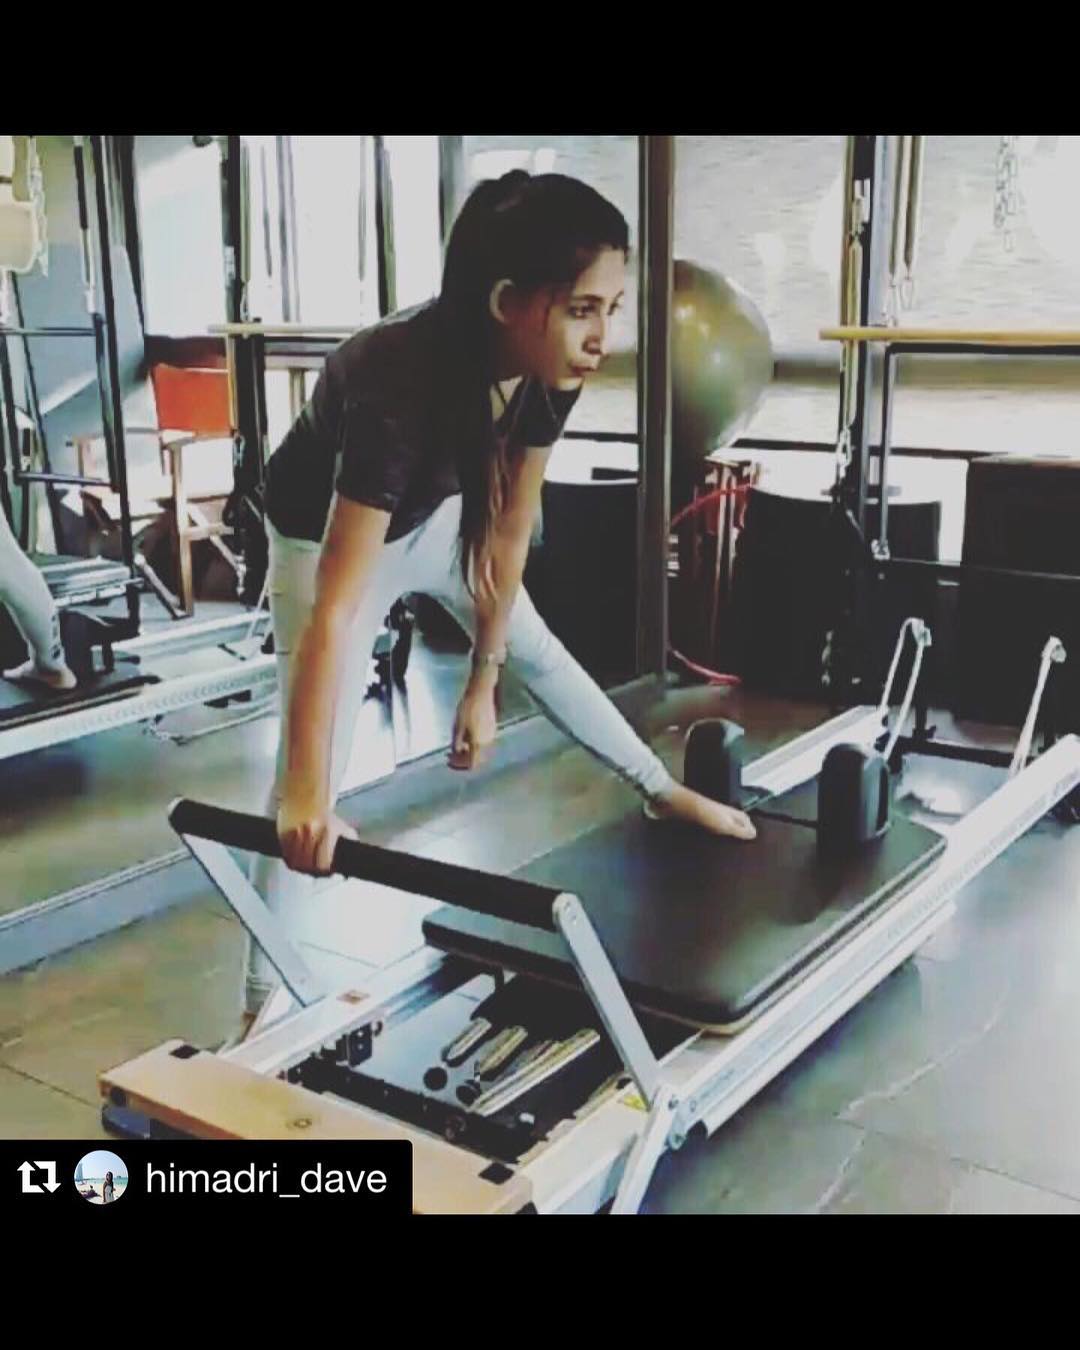 #ClientDiaries: #Repost @himadri_dave with @get_repost
・・・
Pilates because smaller muscles need love too. 💪🏼@closetbuddies @thepilatesstudioahmedabad @harshika.13

Contact us for queries on:  9099433422/07940040991
www.pilatesaltitude.com 
#Pilates #ThePilatesStudio #strength #flexibility #mind #body #soul #workout #FitnessEnthusiast #Fitness #workout #fit #FitnessStudio #Fitspo  #Workout #WorkoutMotivation #fitness 
#pilatesgirl #pilatesbody #thepilatesstudioahemdabad #gettingbettereachday #fitnessforever